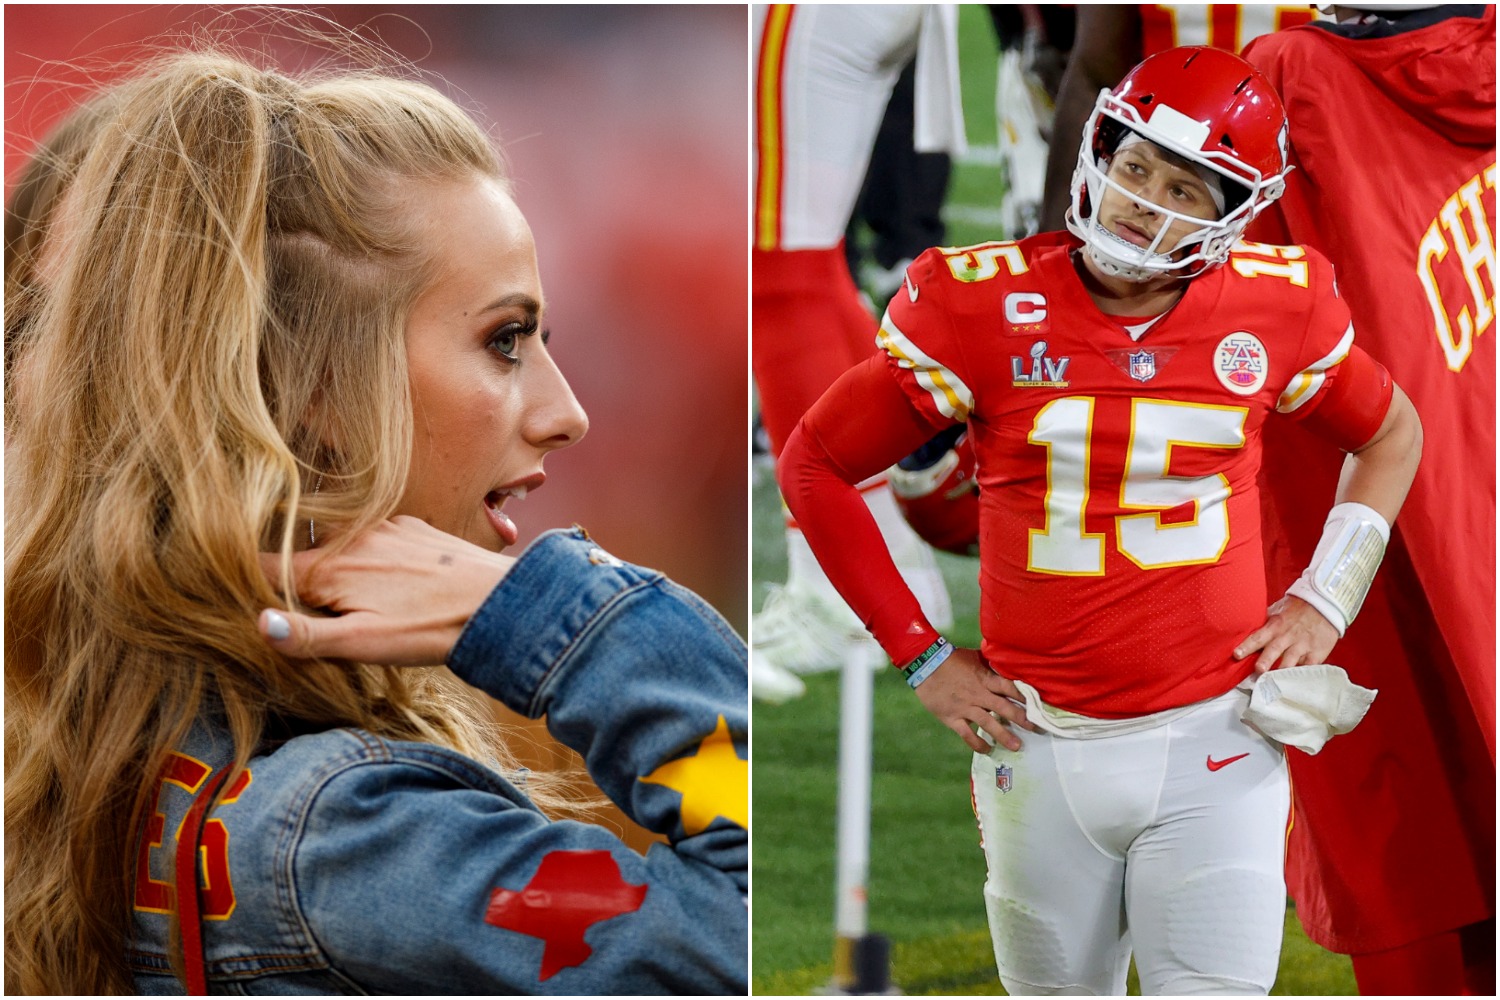 Side by side of Brittany Matthews and her fiance Patrick Mahomes of the Kansas City Chiefs